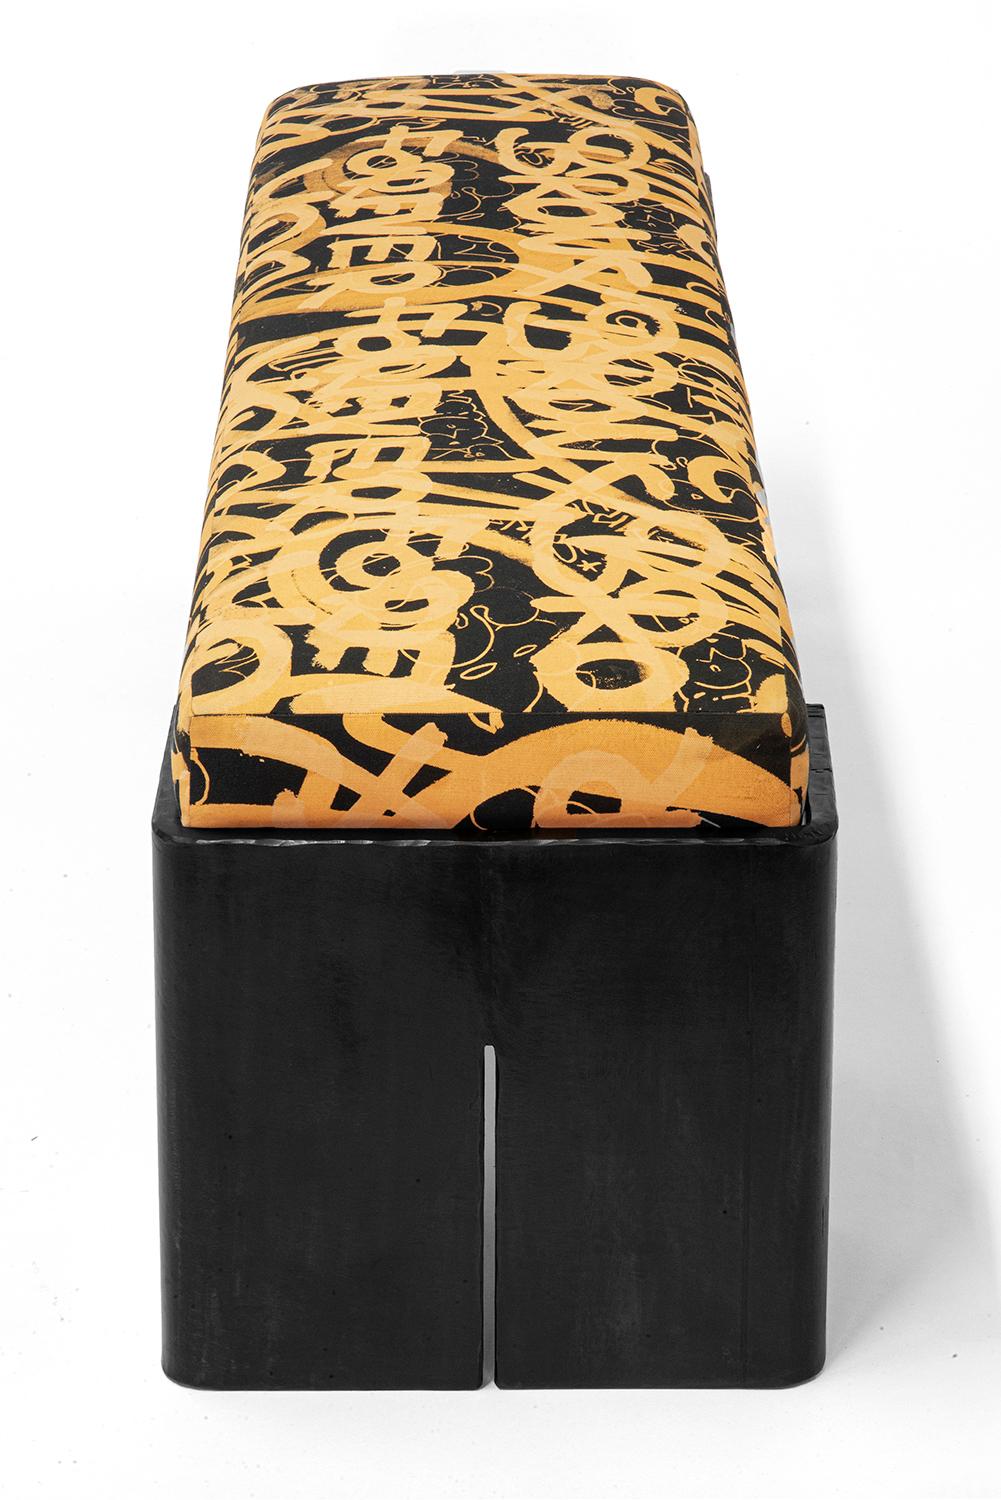 Carved Bench in Knoll Textile Plush Mohair with Blackened Steel Modern Contemporary For Sale